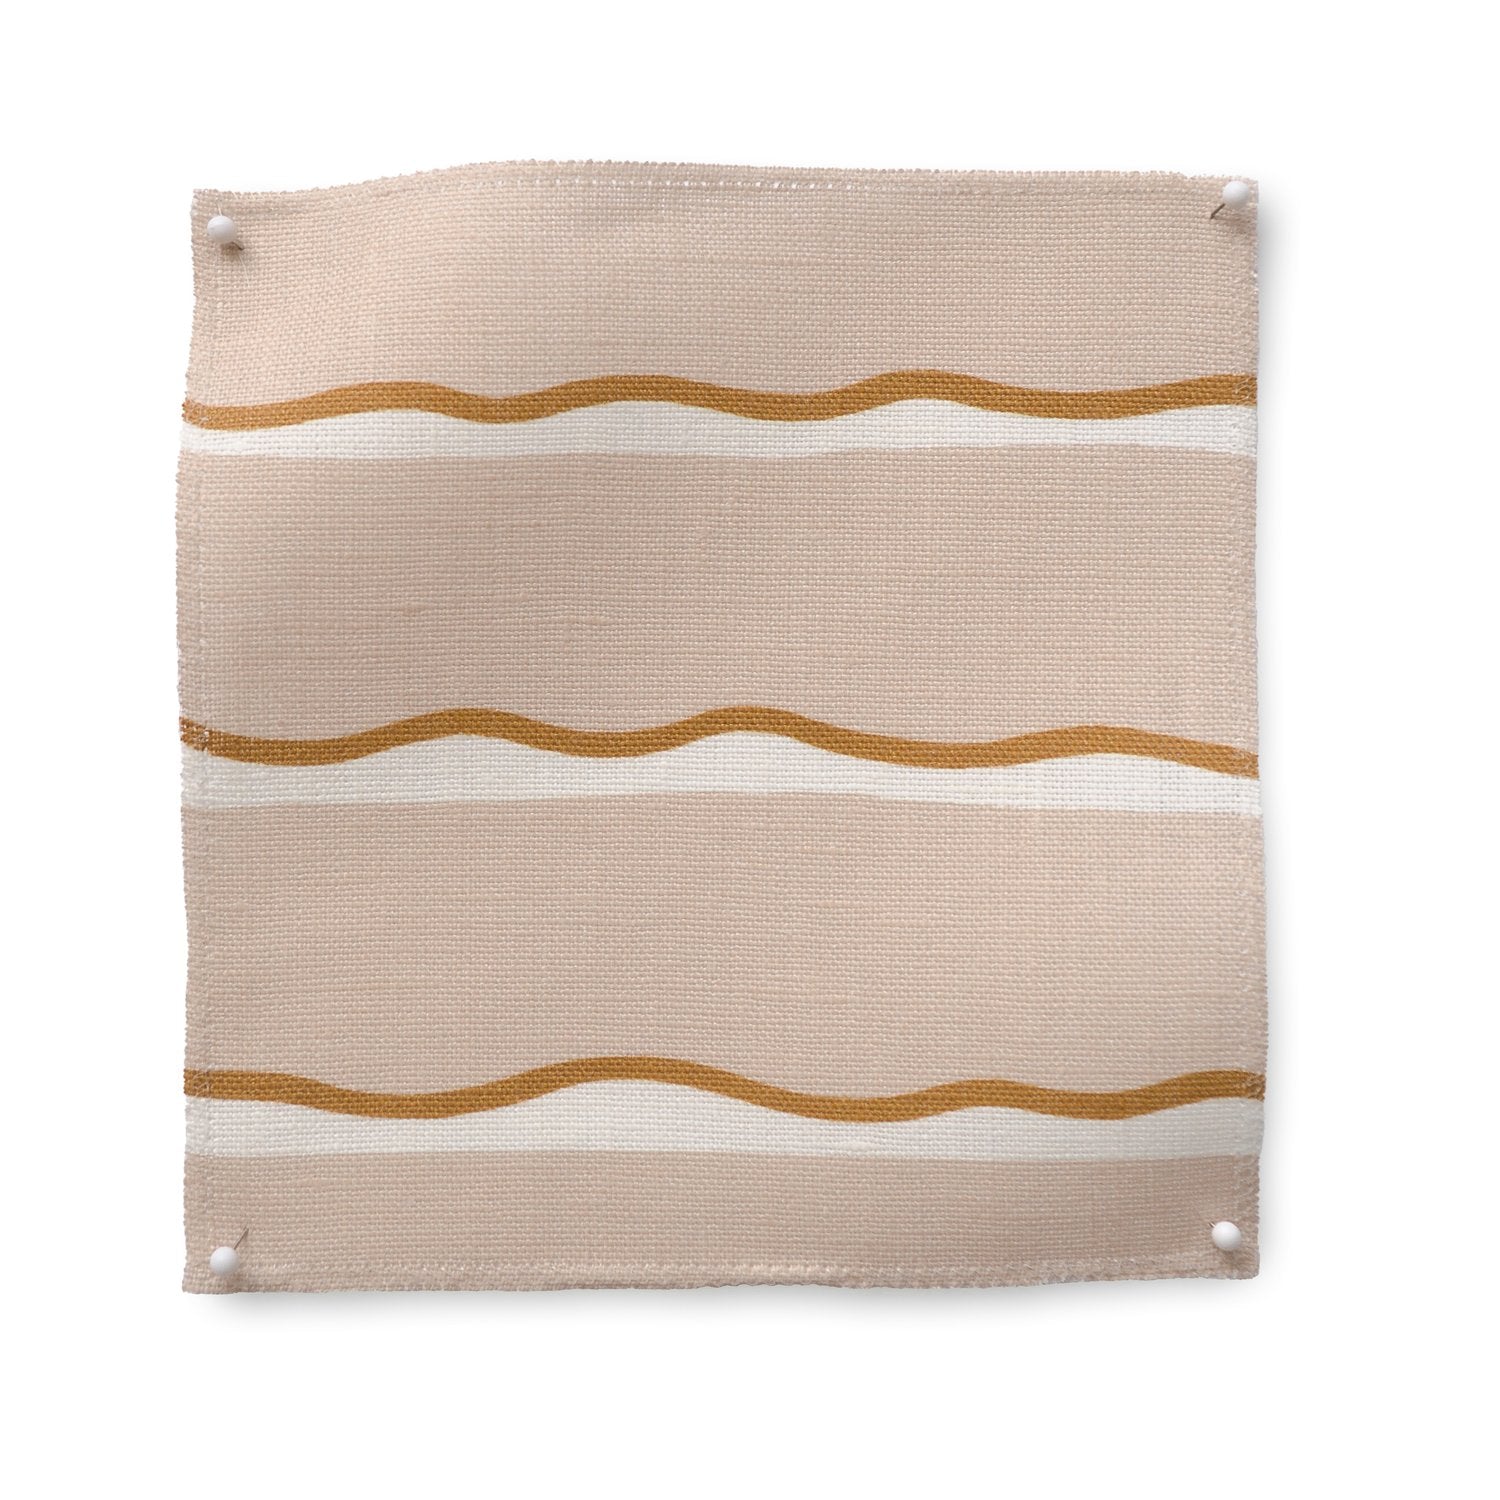 Square fabric swatch in a wide undulating stripe pattern in brown and white on a light pink field.